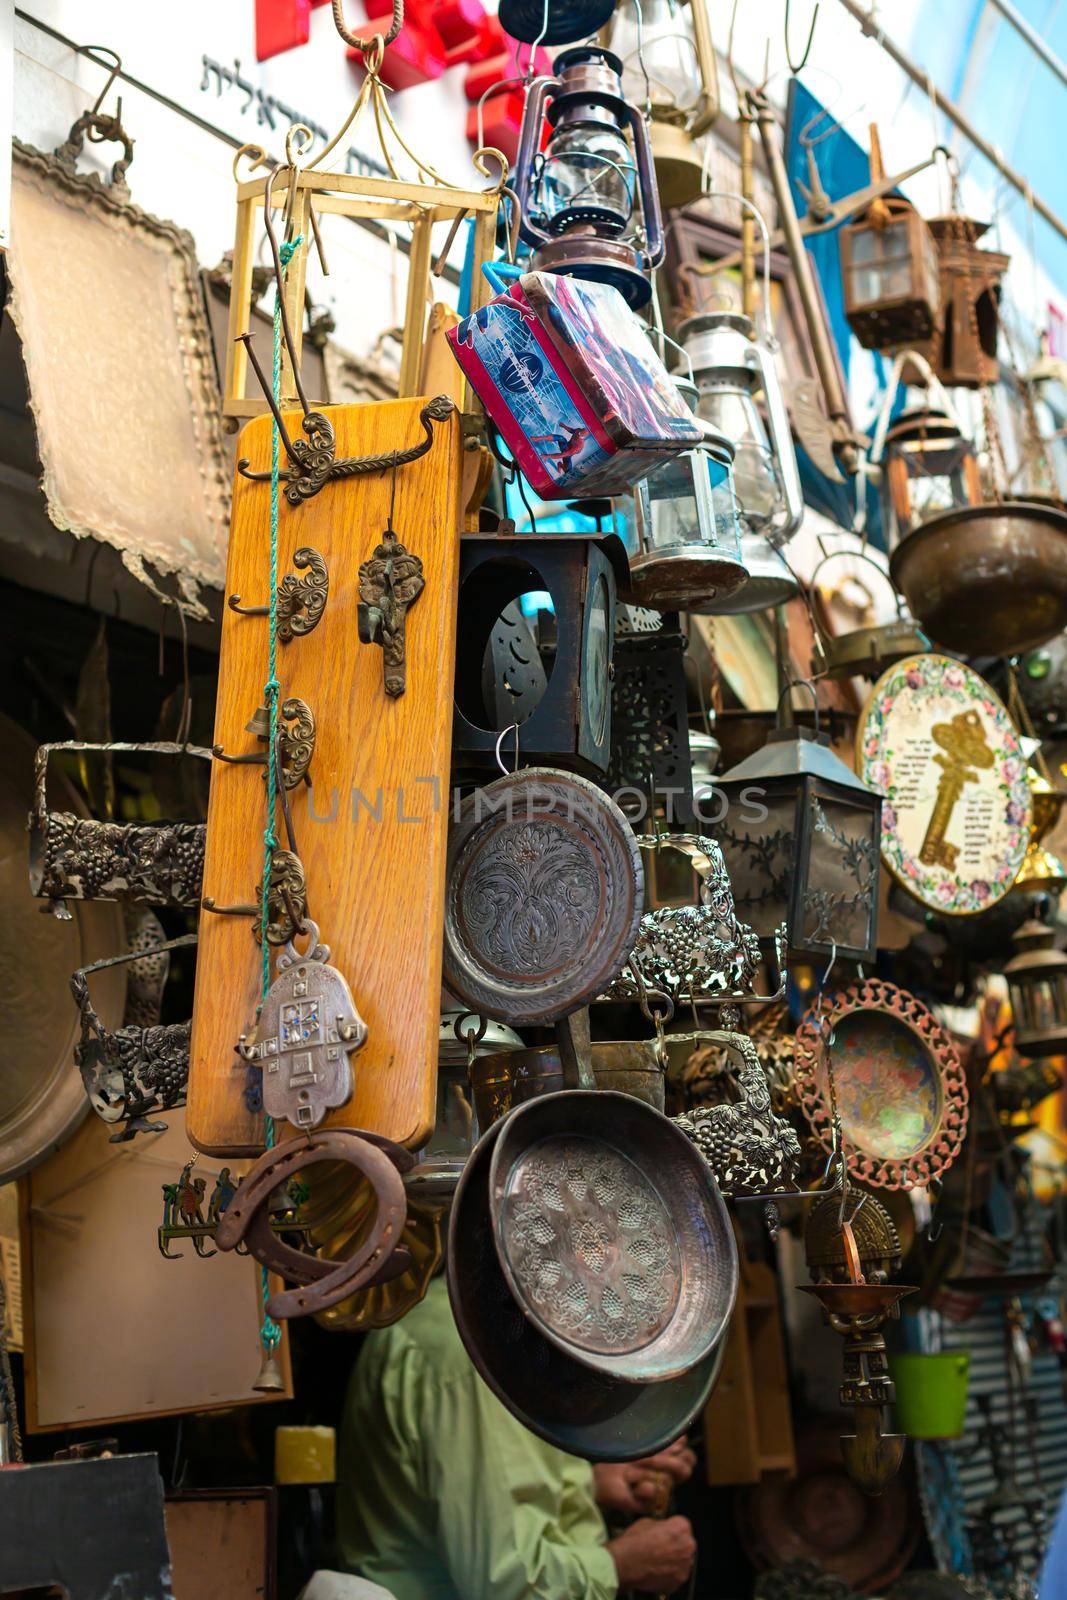 Street market of souvenirs and antiques in Israel.